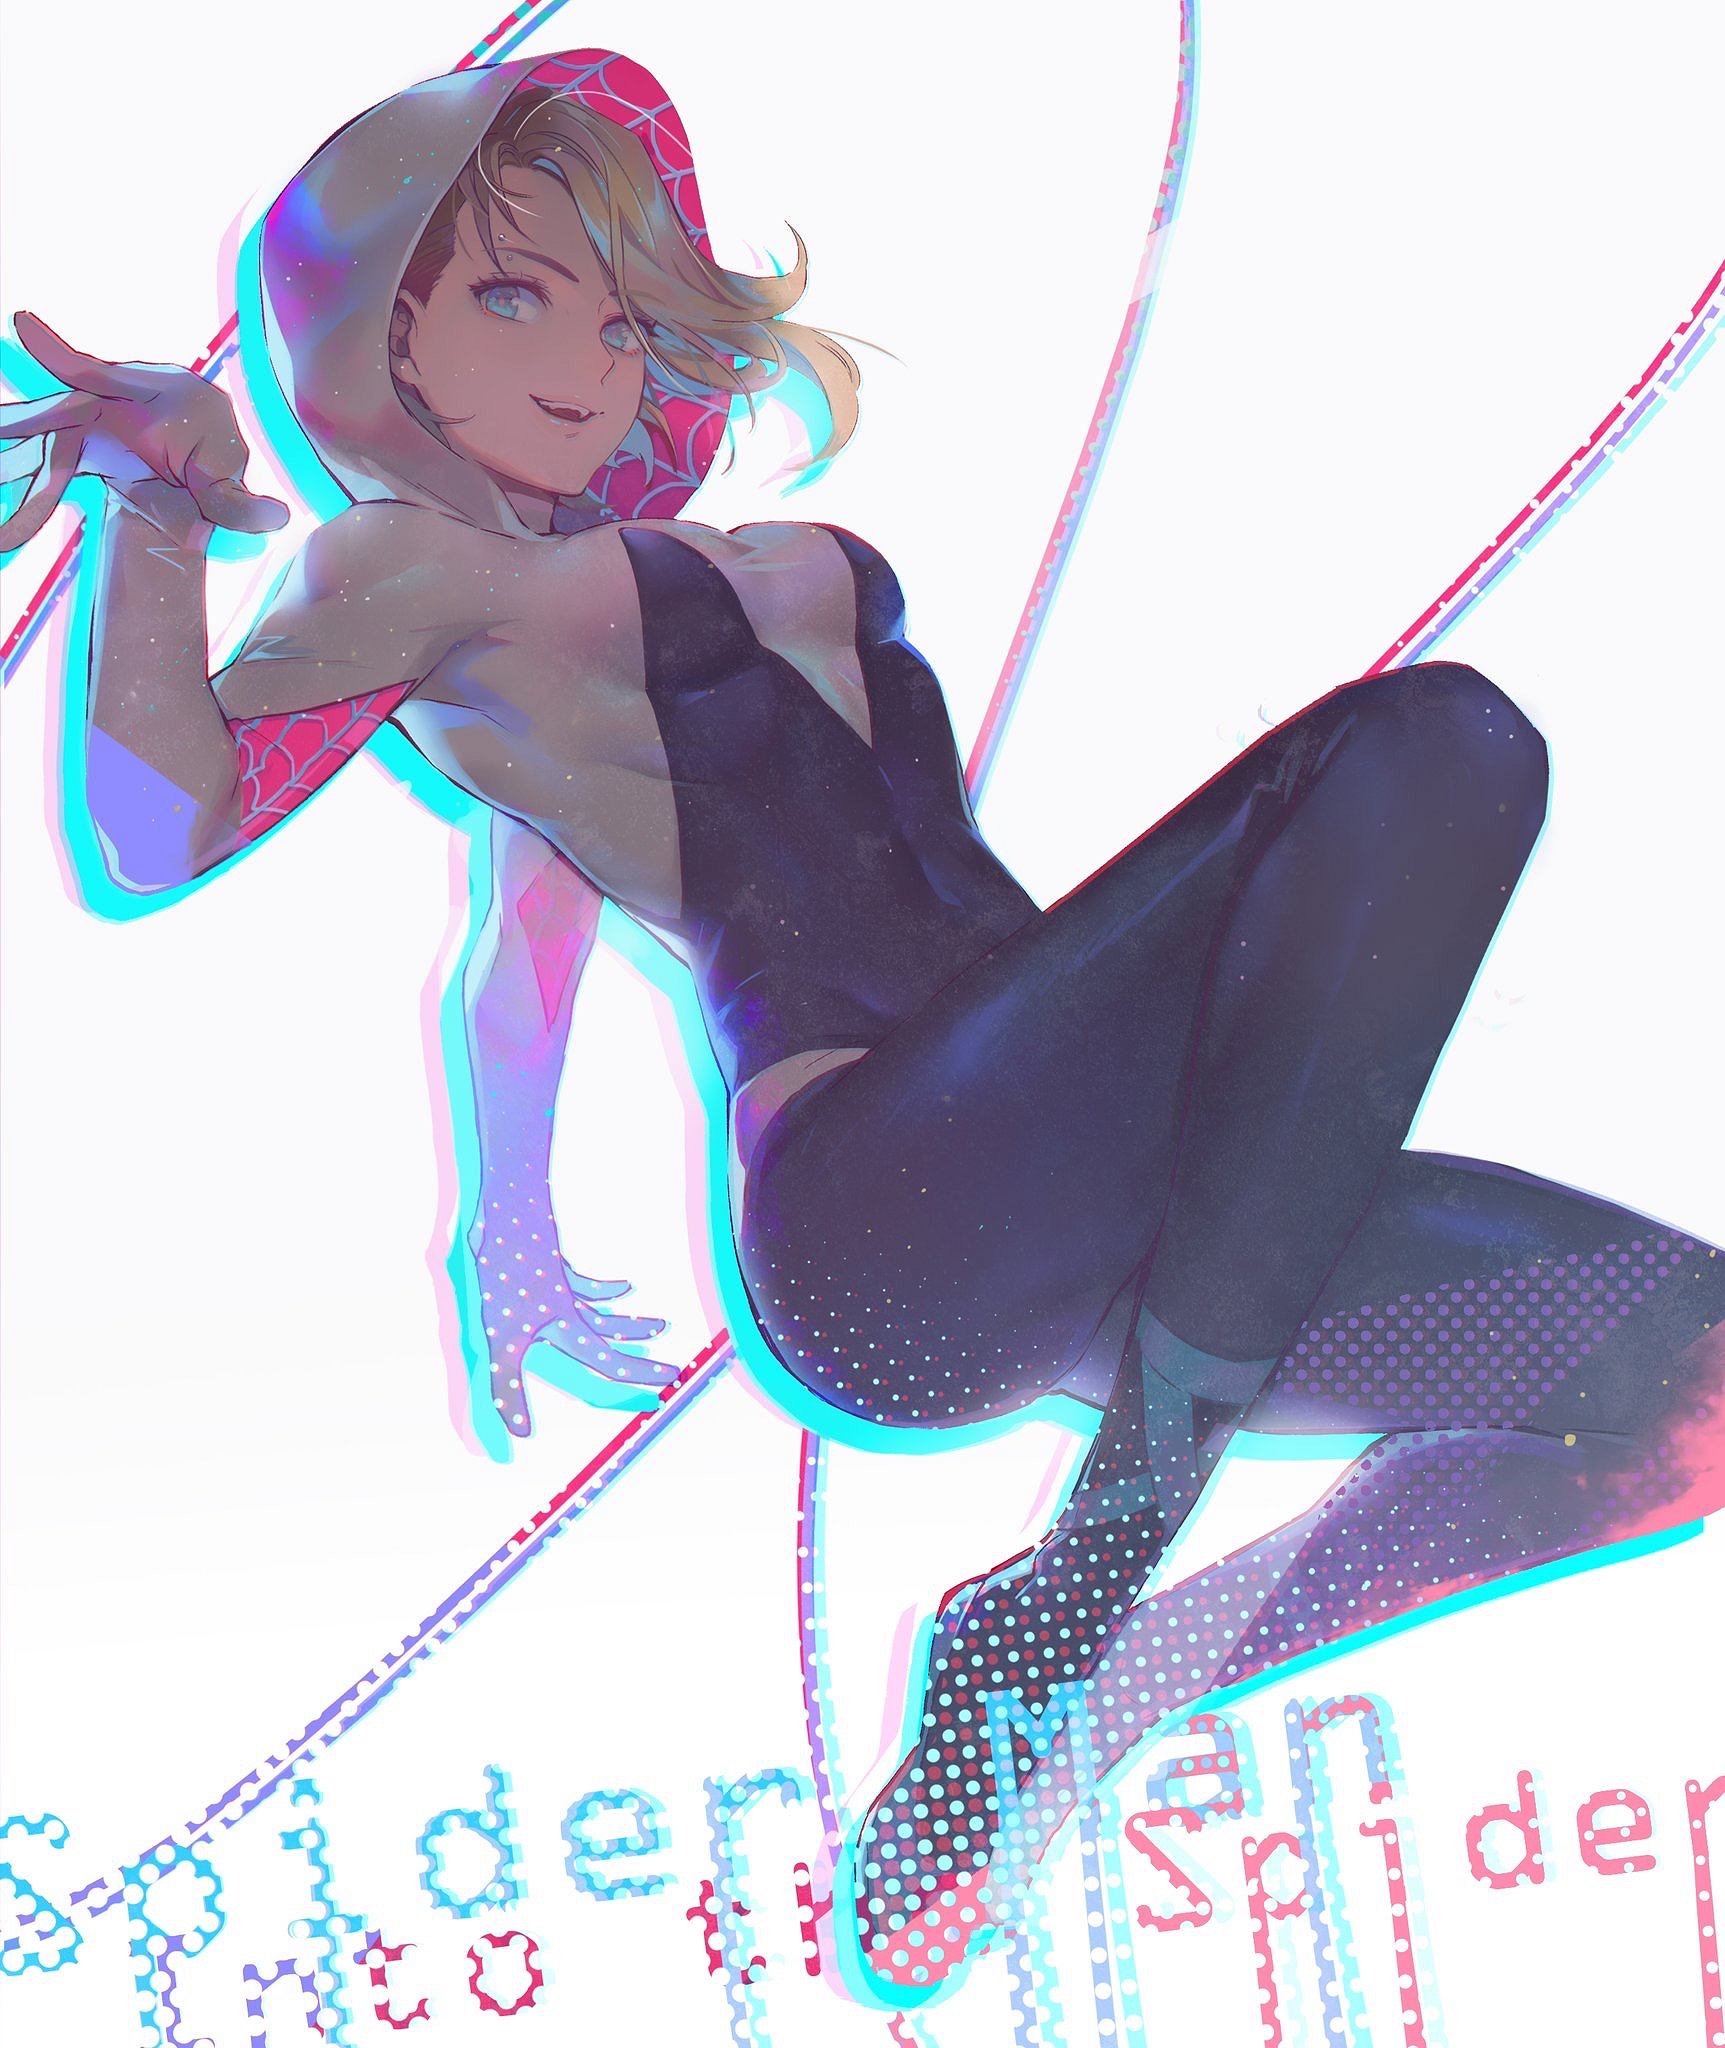 Gwen Stacy (Spider-Woman): Into the Spider-Verse fanart: Cartoons and Movies (Artist: Lino chang)